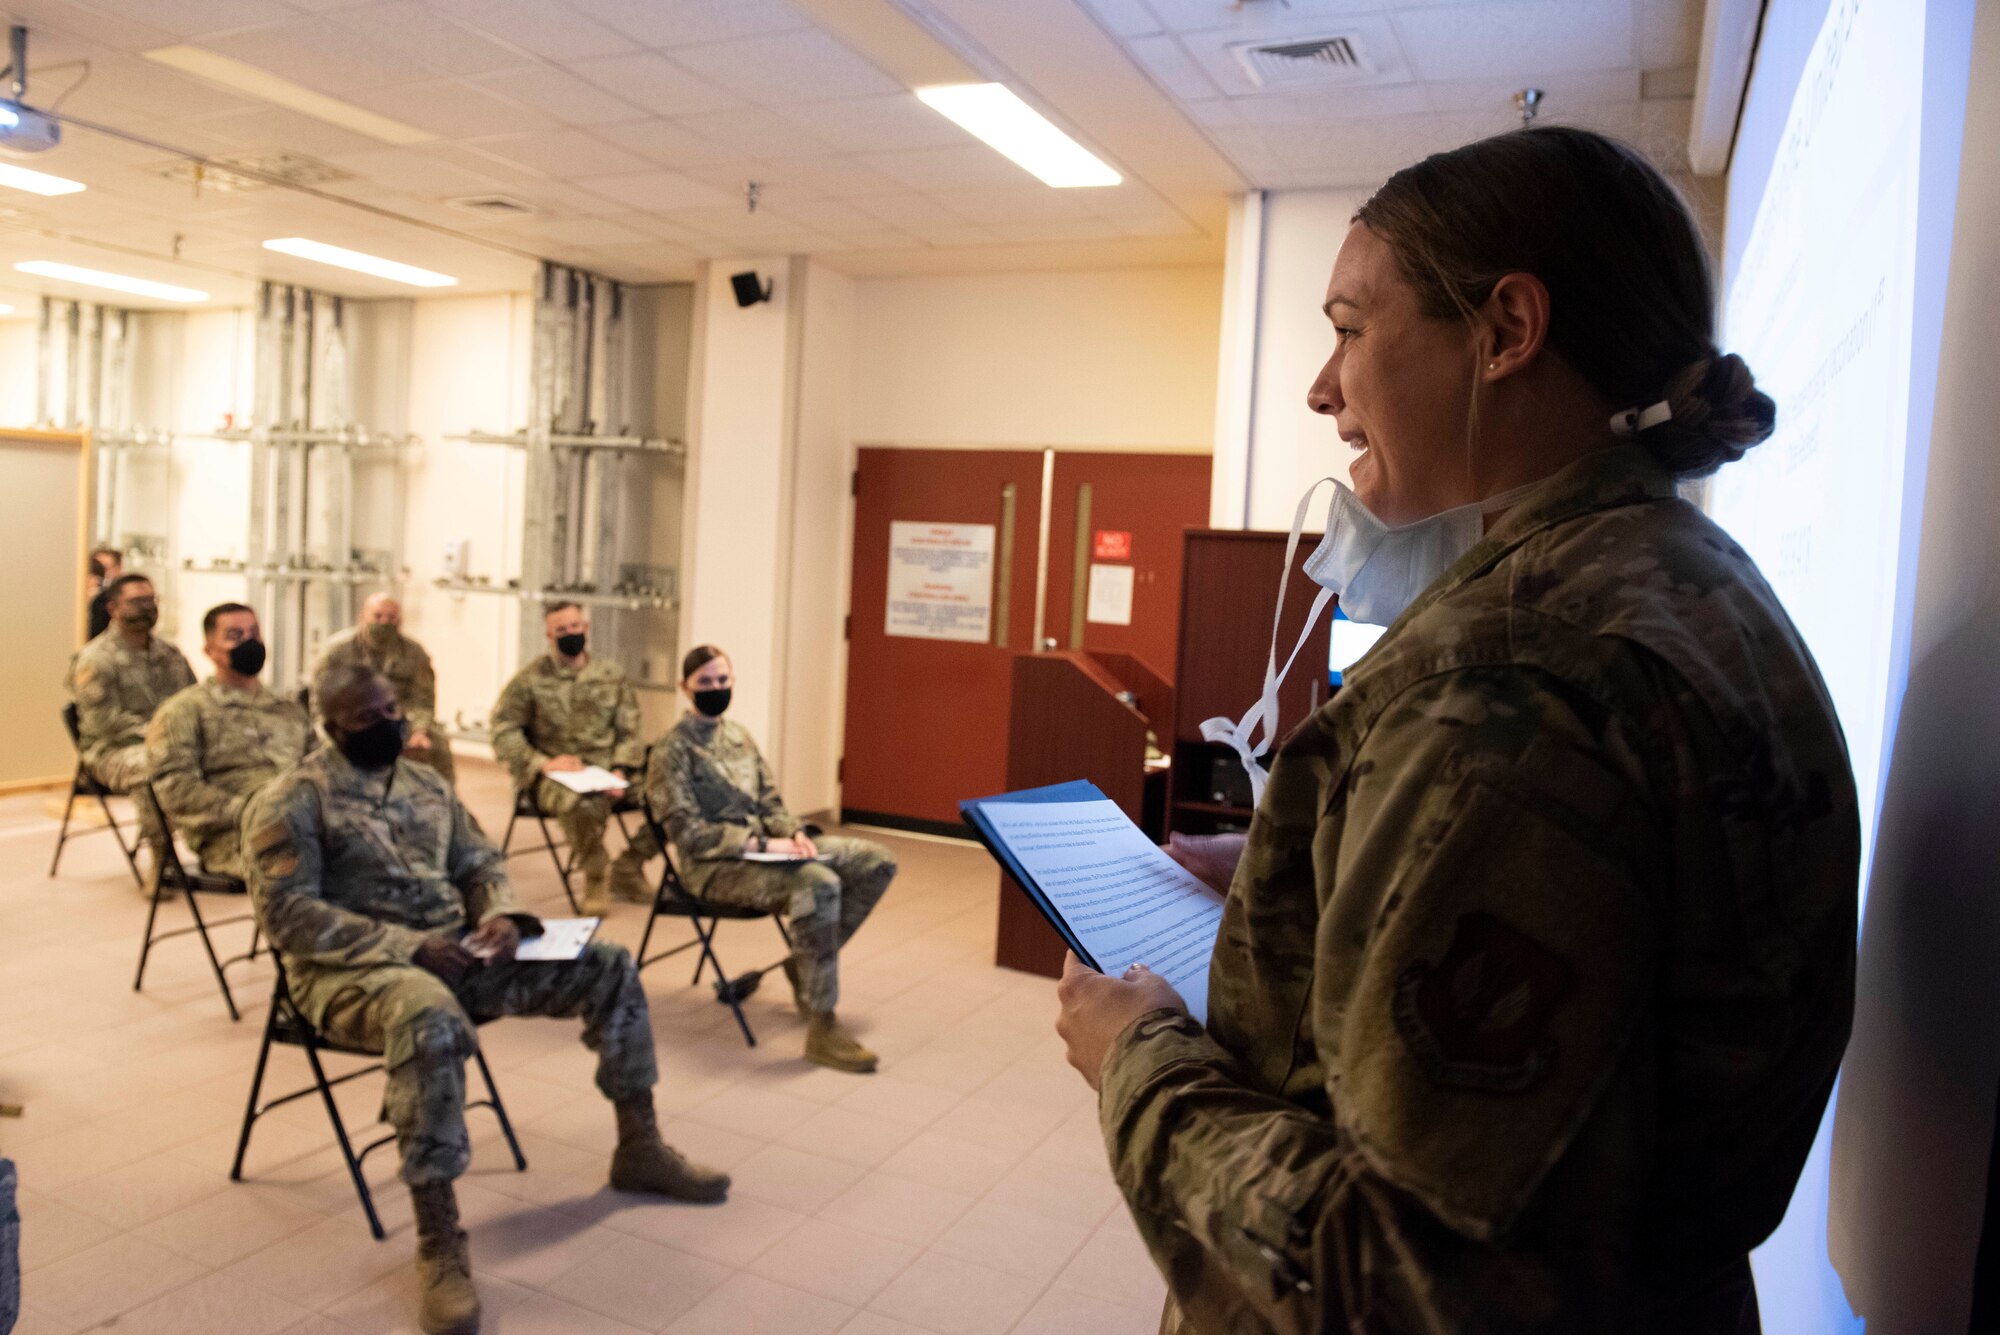 A female captain talks to a small crowd of people in a clinic waiting room.